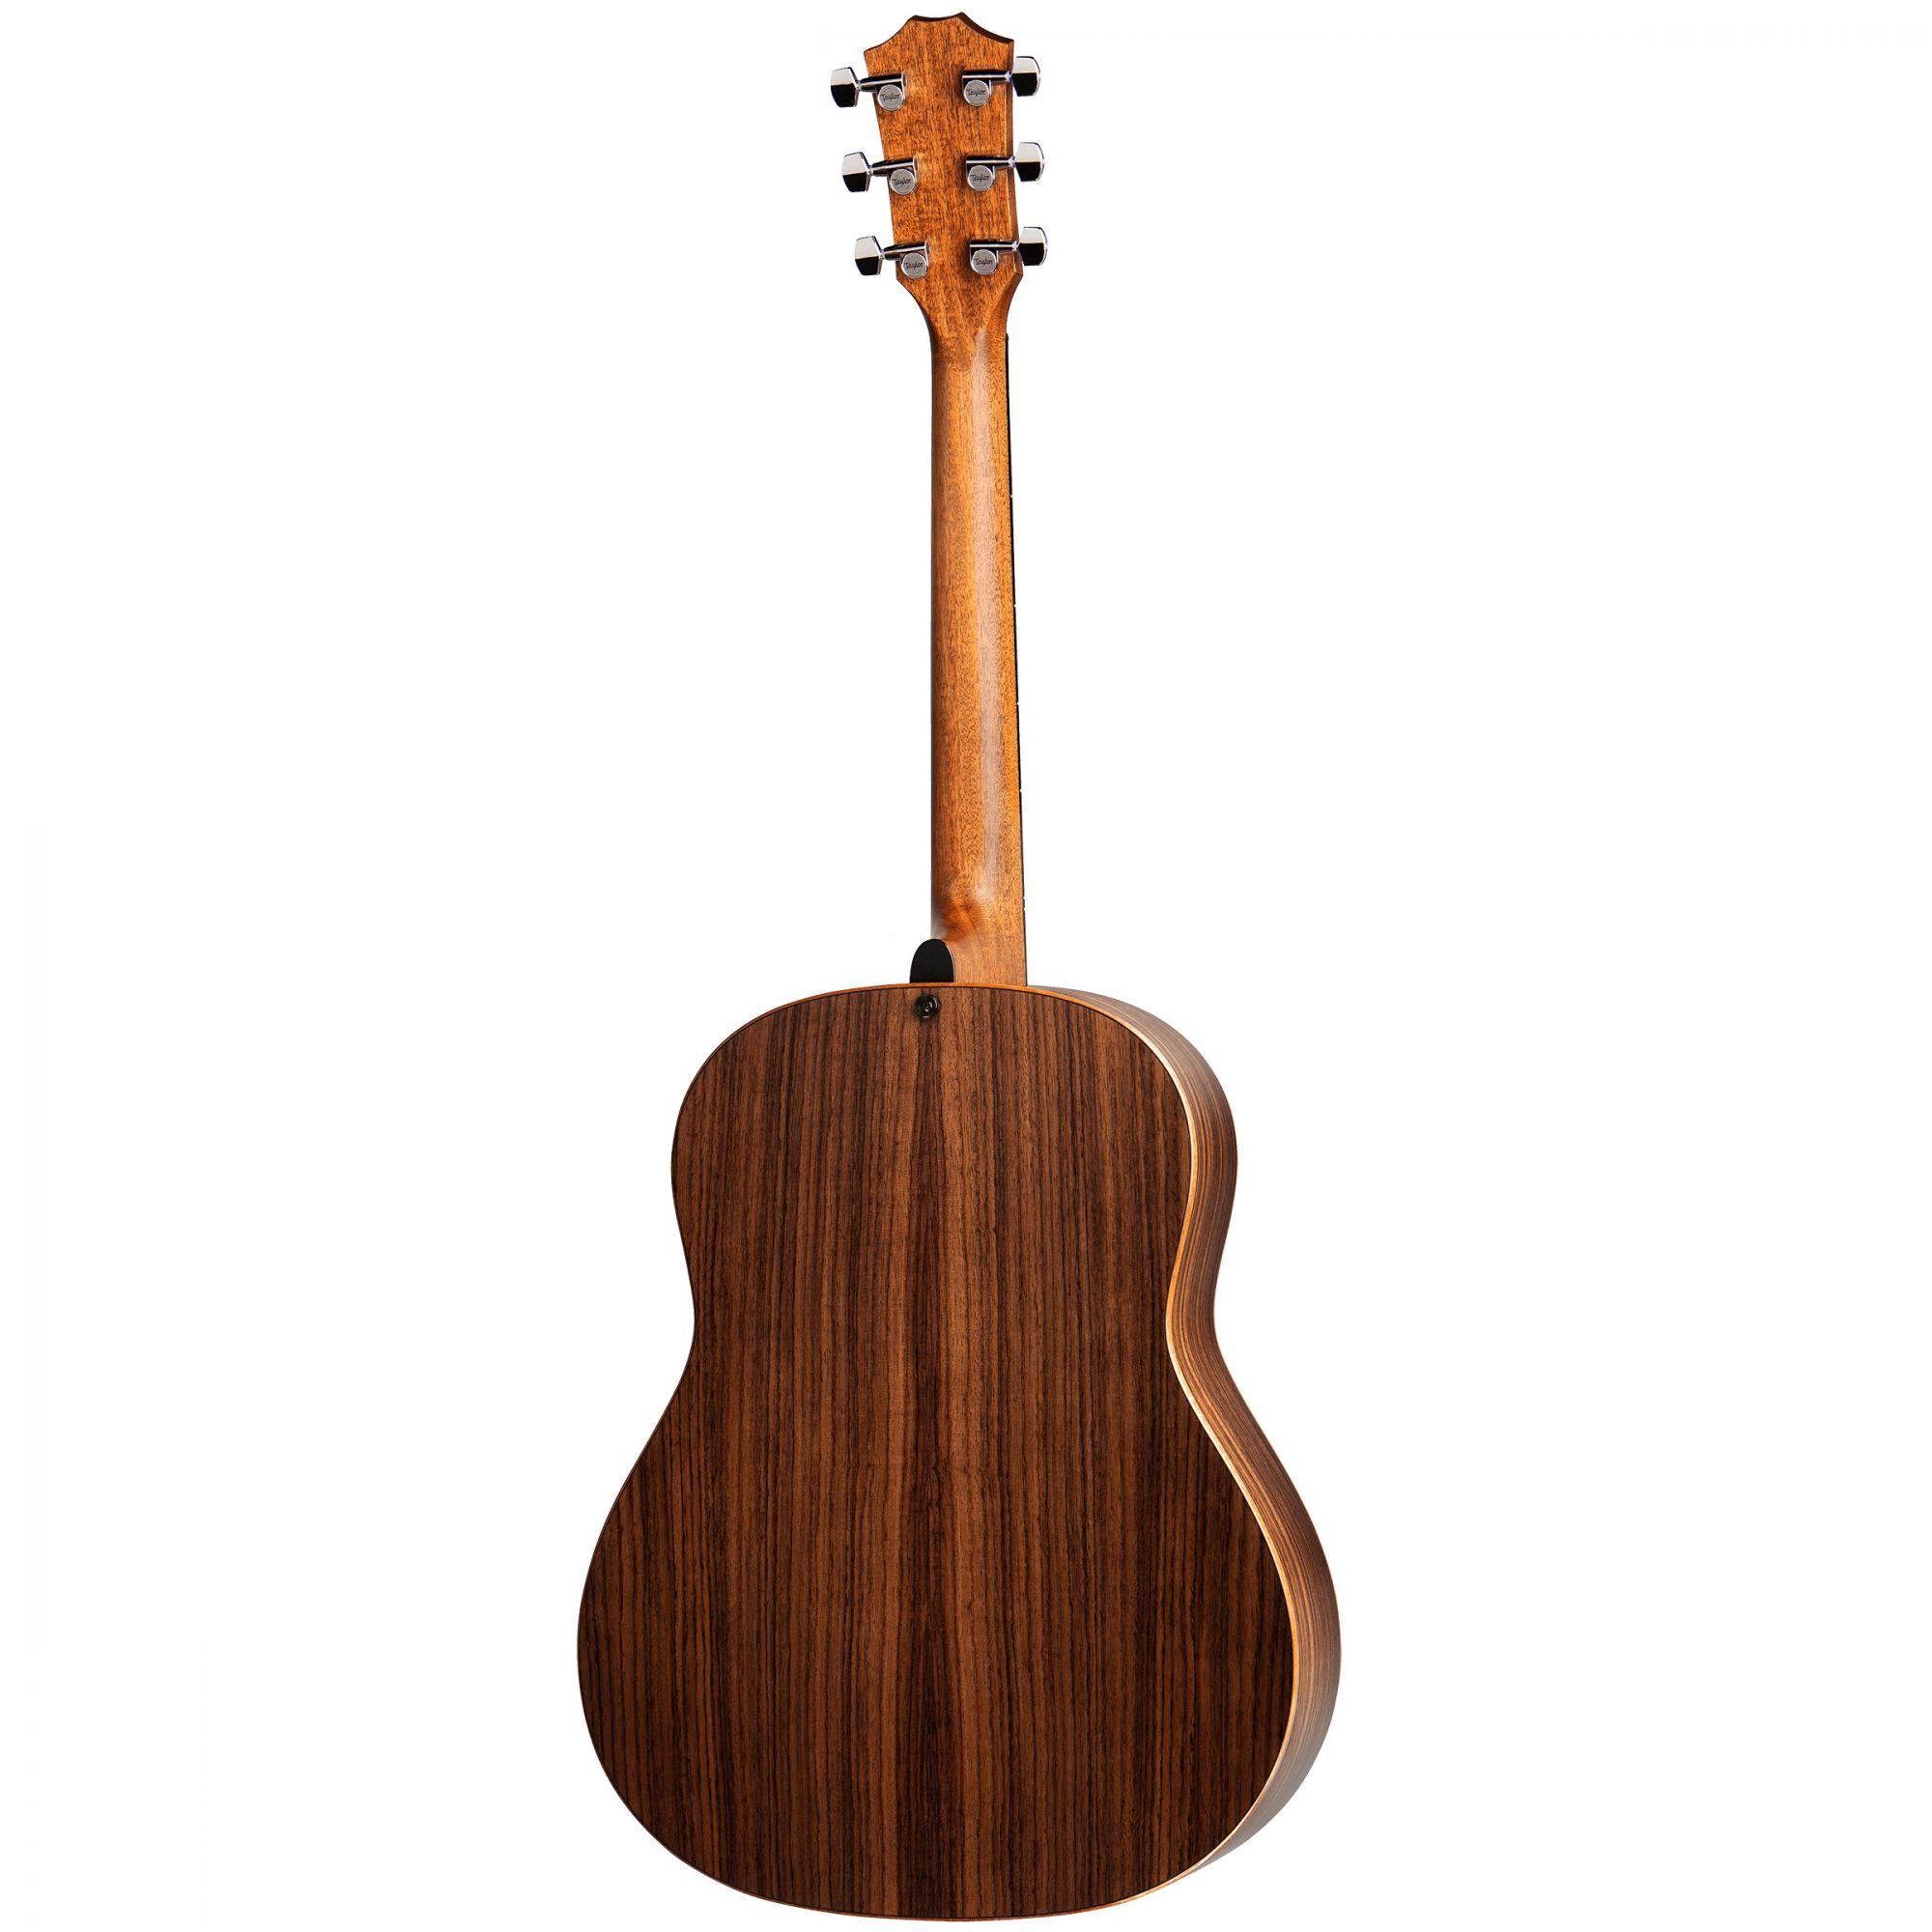 Taylor Builder's Edition 717 Grand Pacific Acoustic Guitar